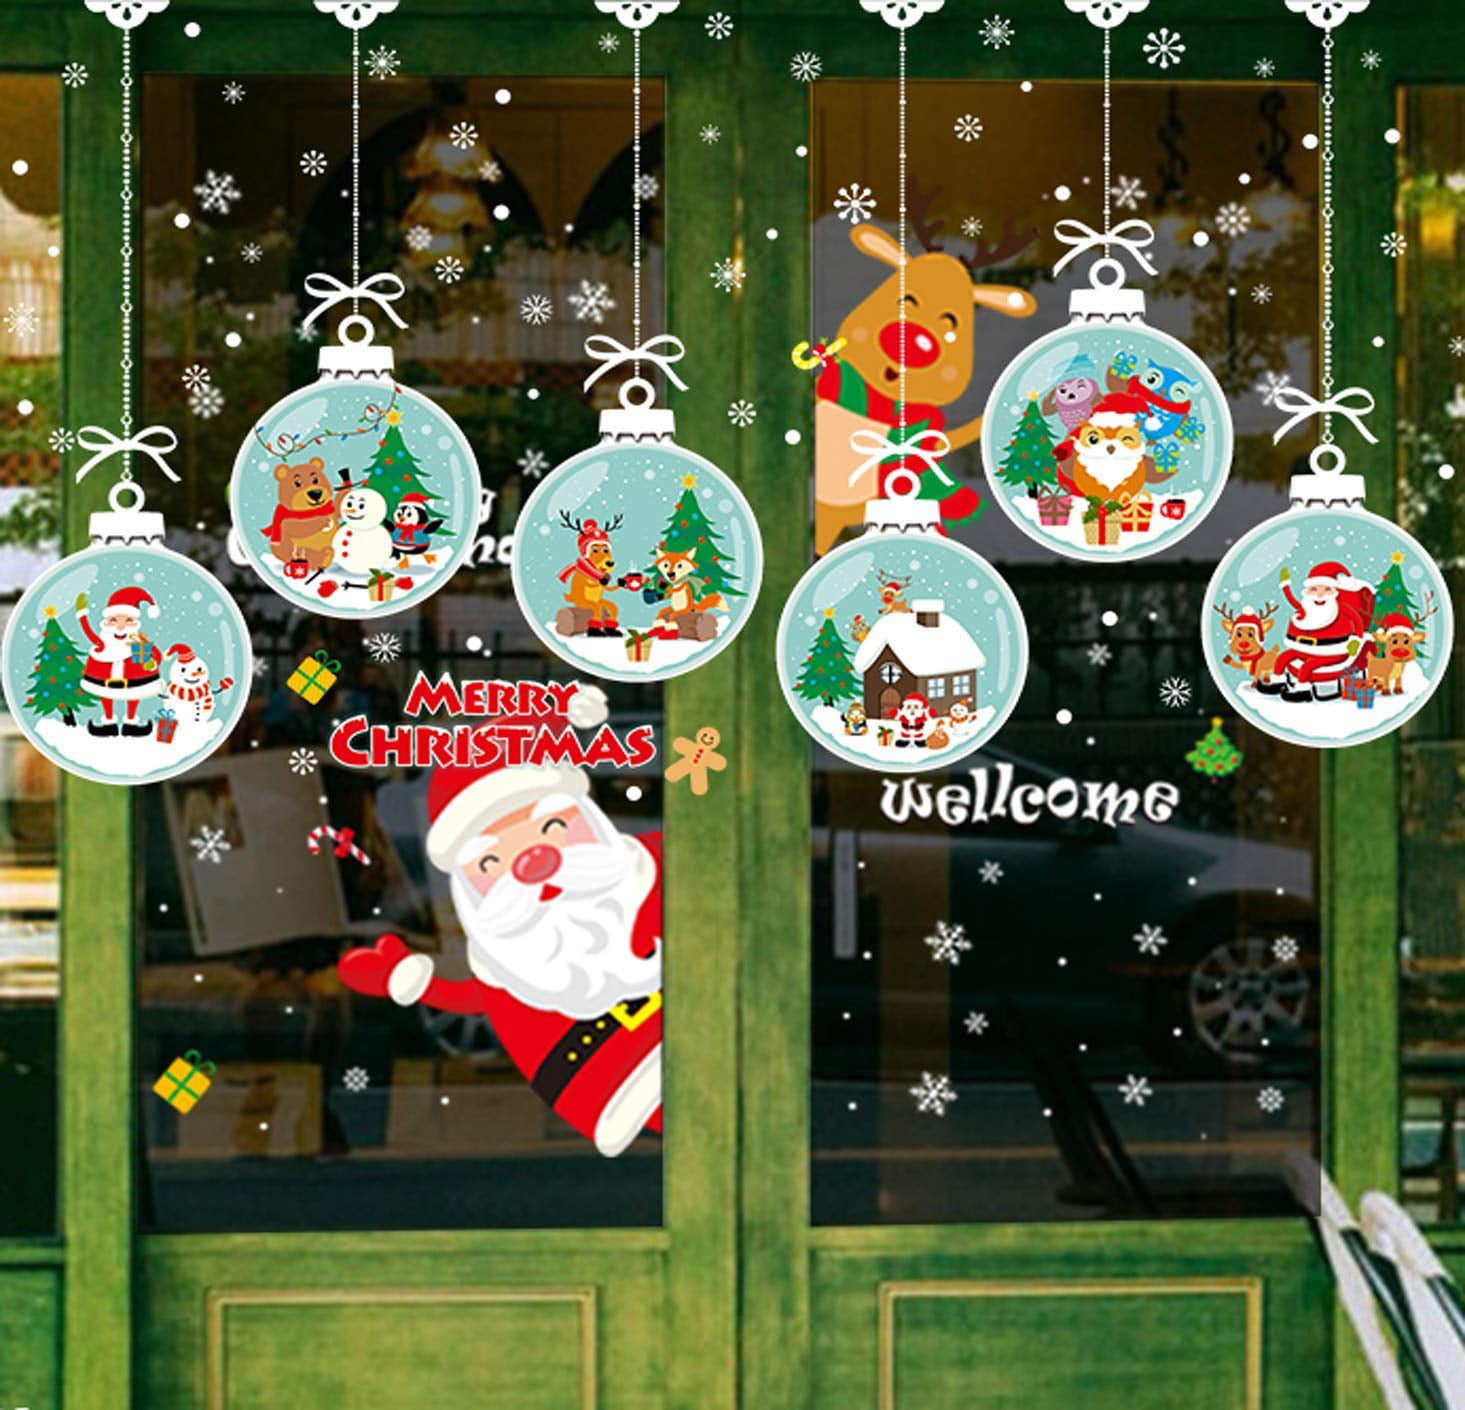 Snowman Wall Sticker Christmas Sticker Window Santa Claus Christmas Sticker Christmas Decoration Including Snowflakes Sly 